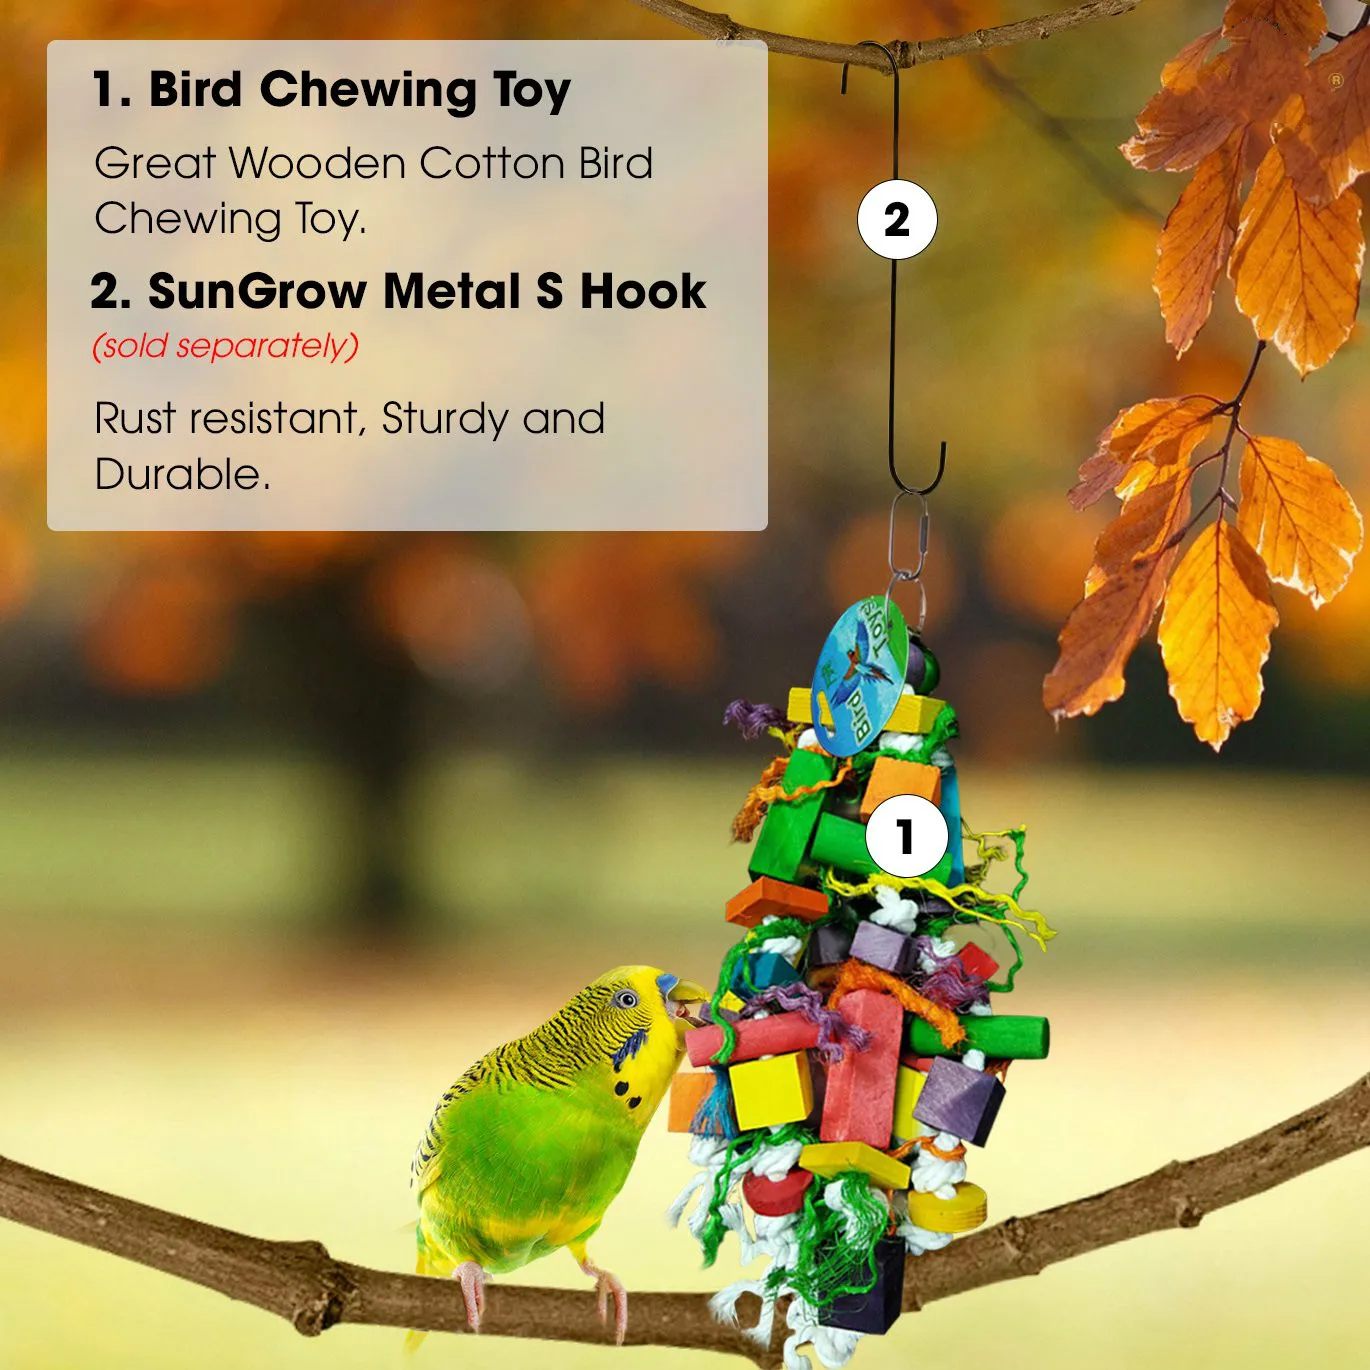 Keeps Physically and Psychologically Fit Bird Chewing Toy Nibbling Keeps Beaks Trimmed Multicolored Wooden Blocks Attract Pets Attention Preening Keeps Feathers Clean 